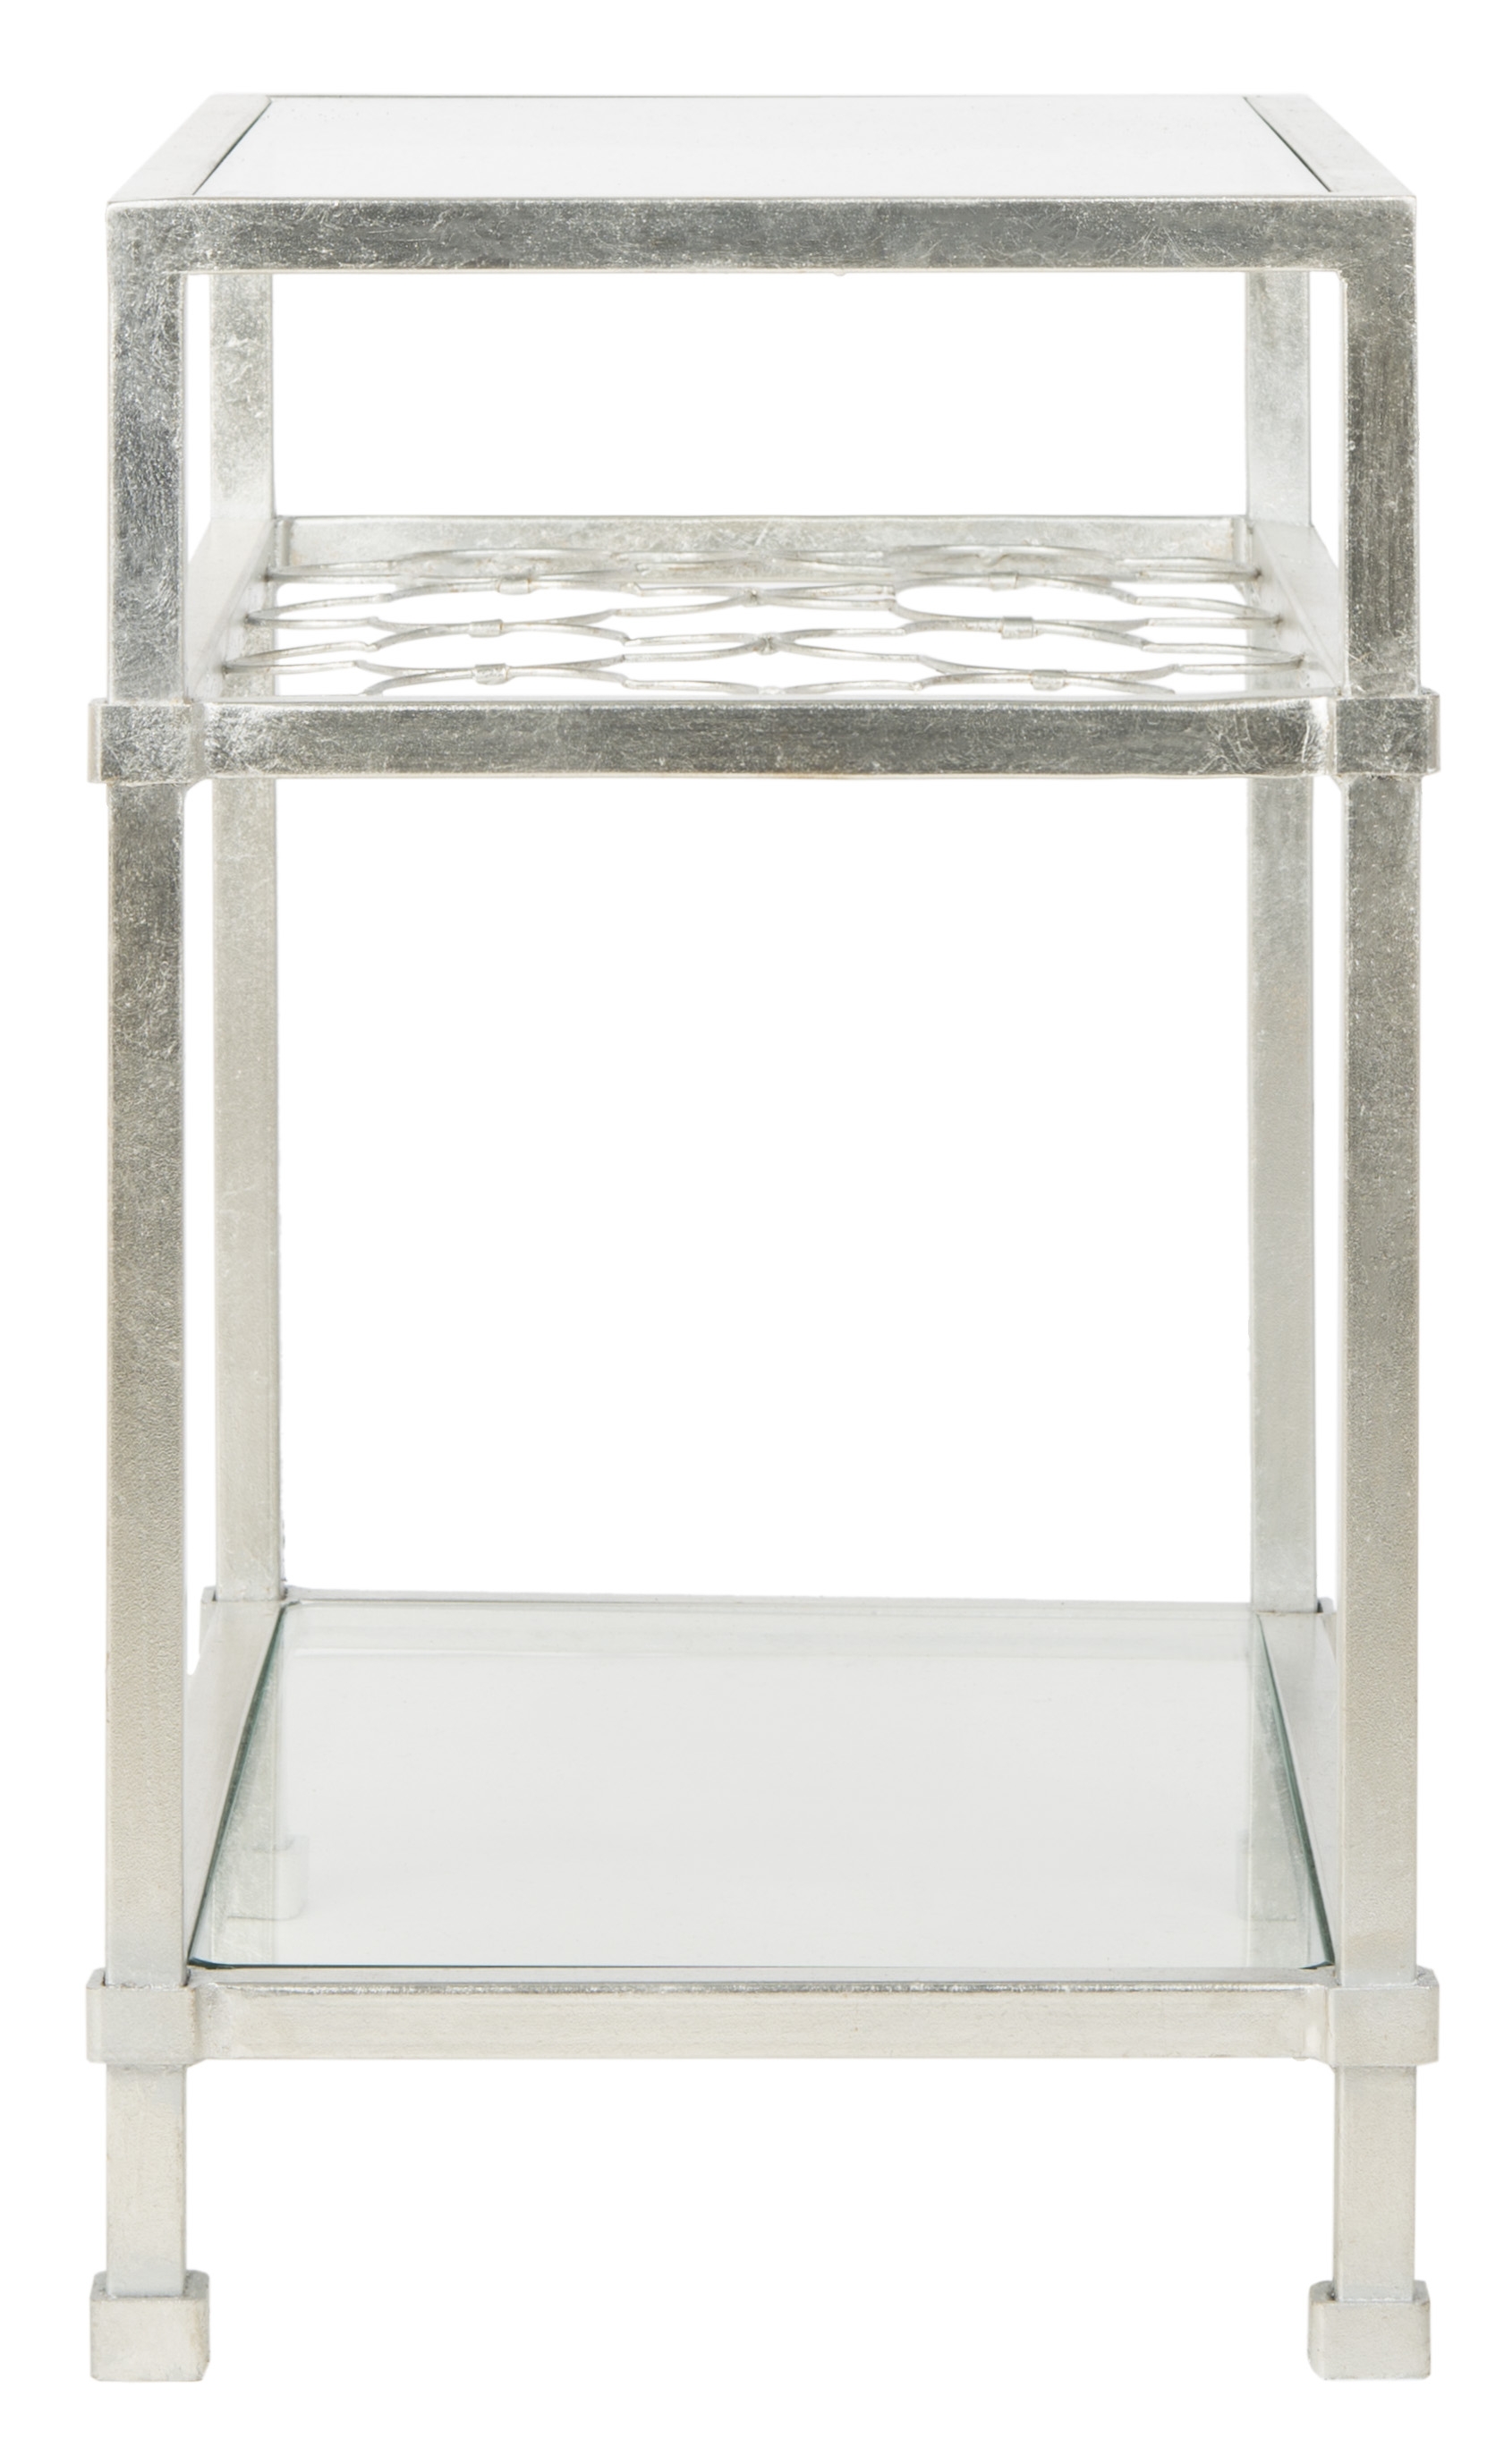 Hanzel Silver Leaf Glass Side Table - Silver - Arlo Home - Image 2